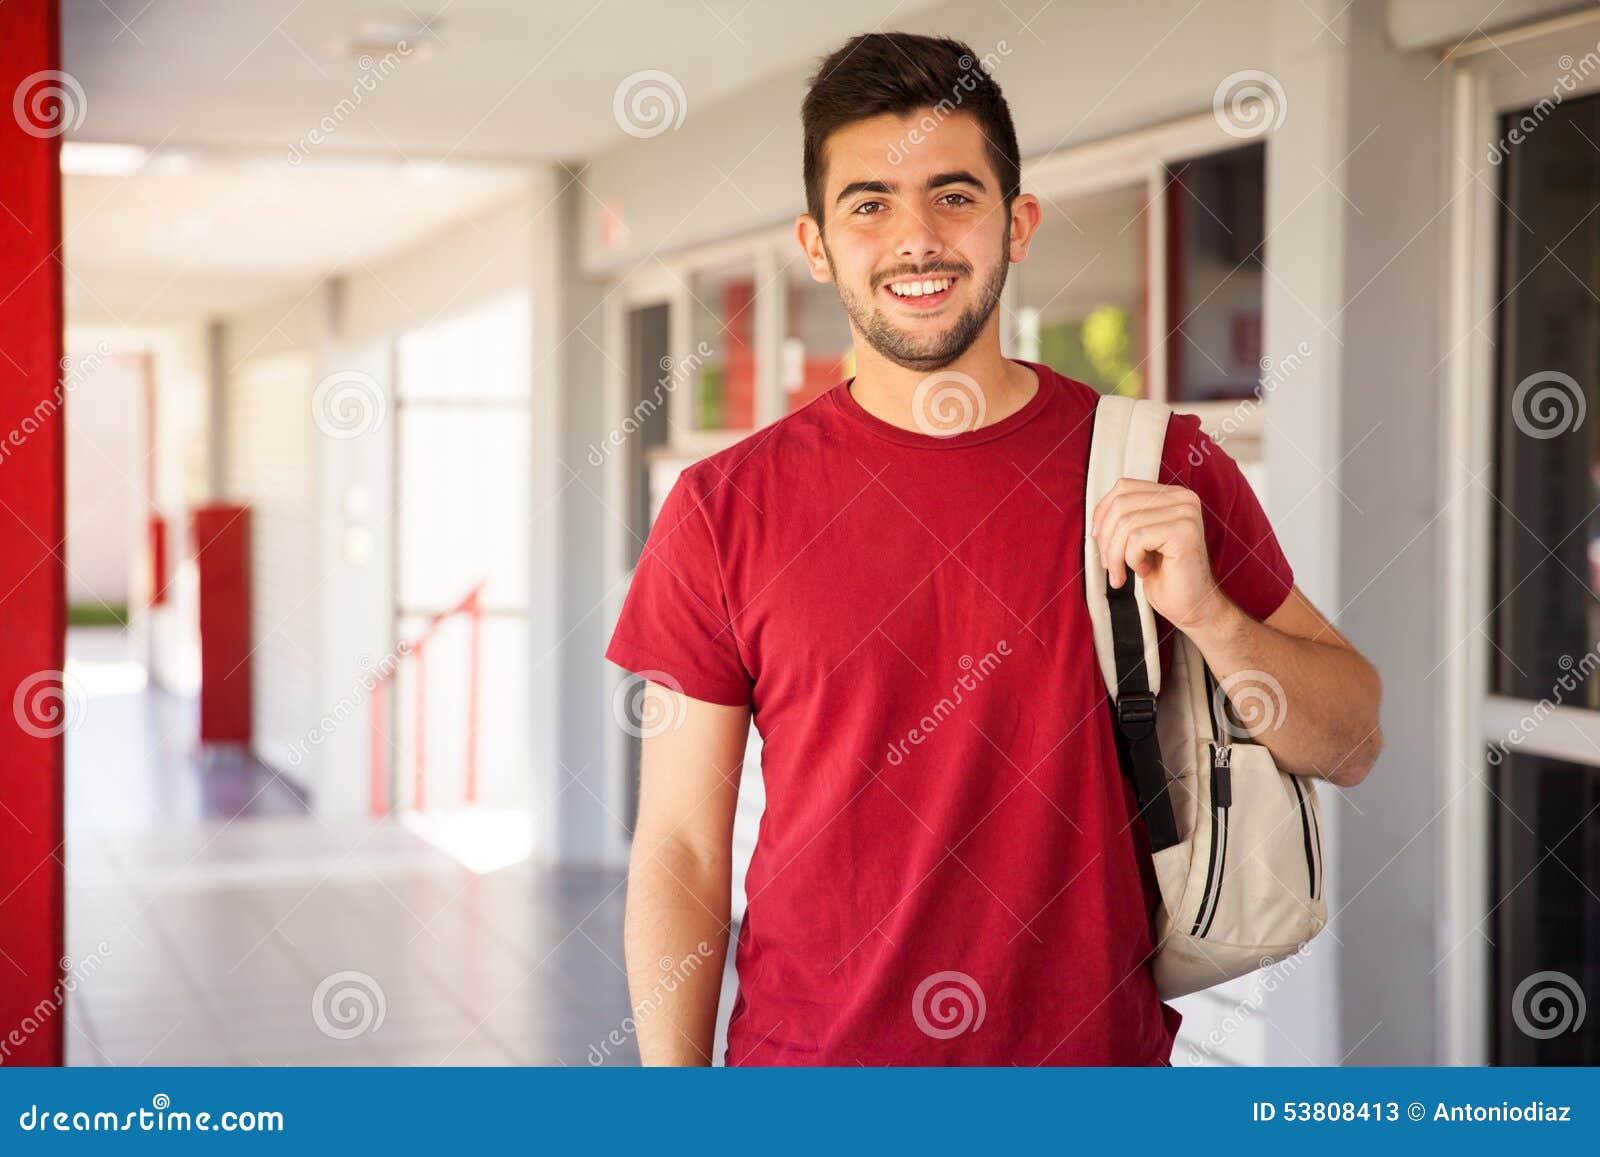 Handsome College Student Stock Photo - Image: 53808413